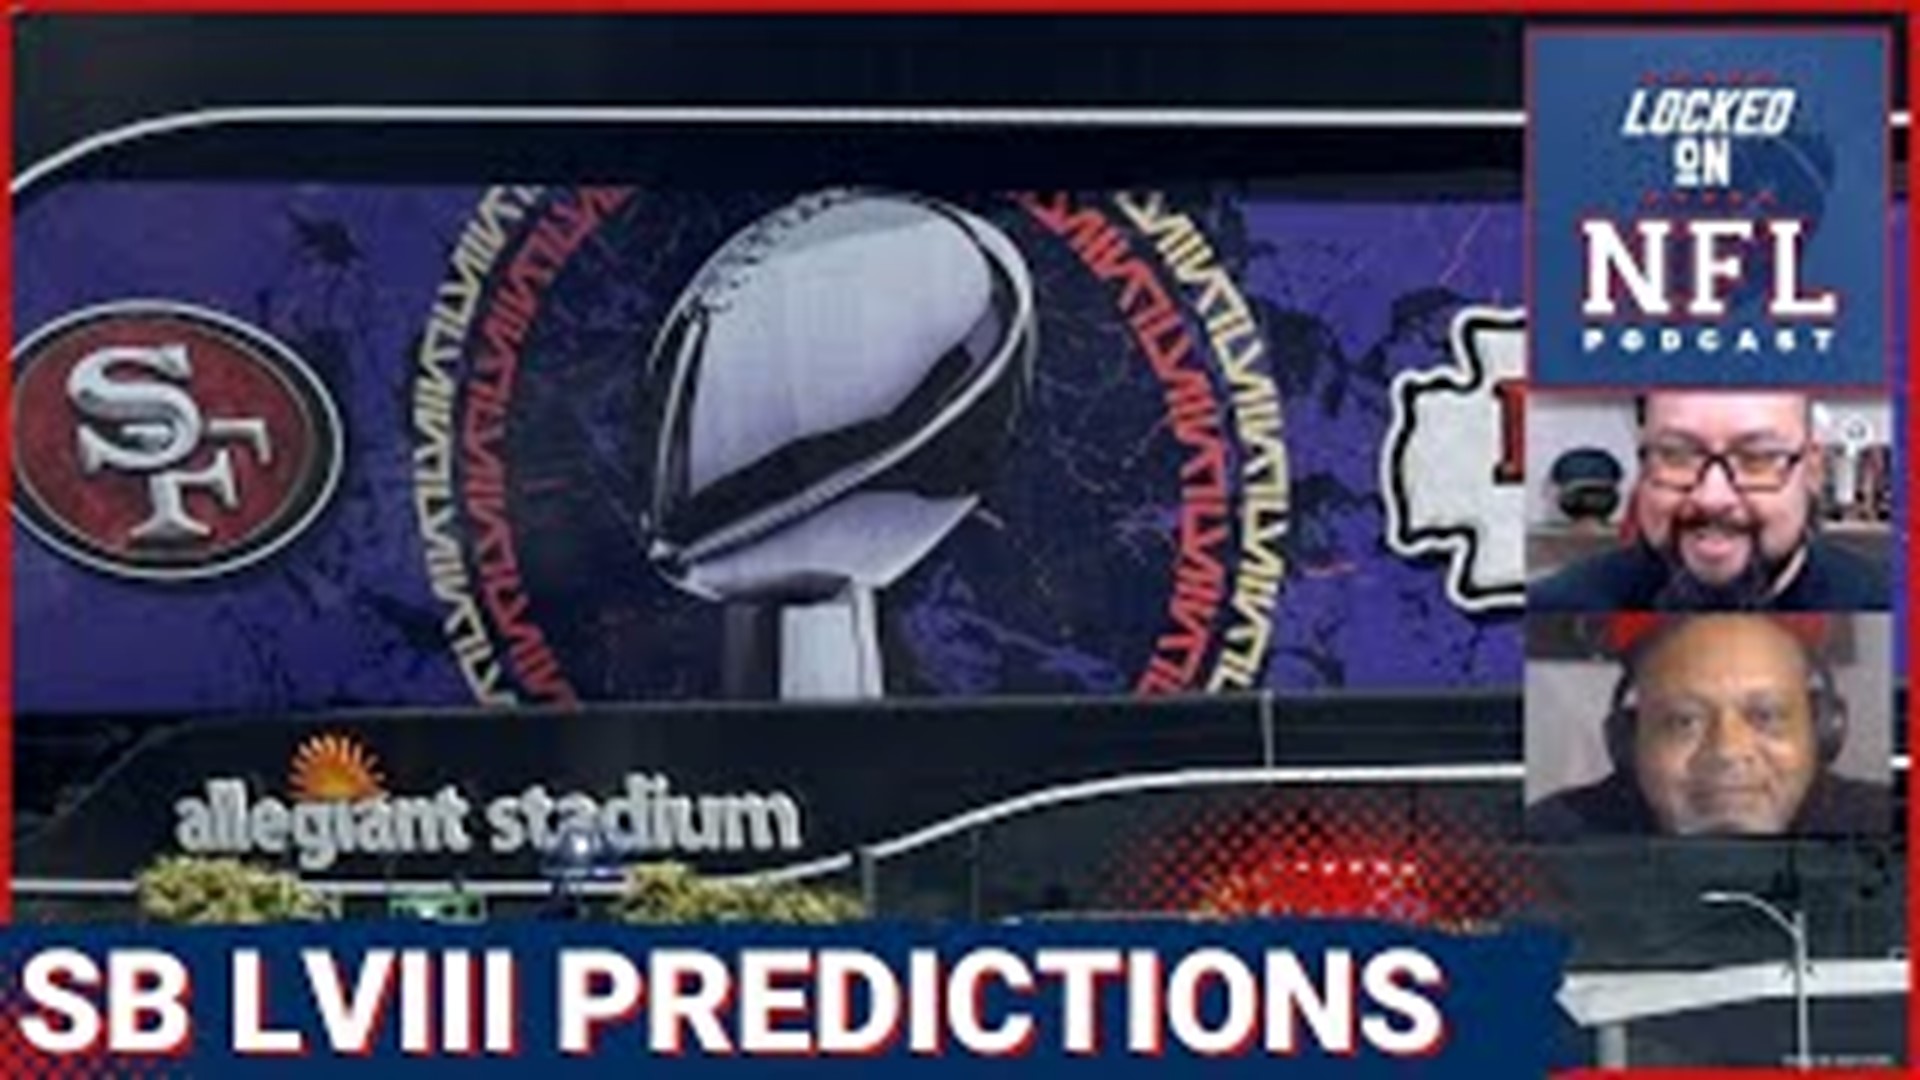 Predicting the Super Bowl LVIII matchup between the Kansas City Chiefs and the San Francisco 49ers along with a discussion about the NFC East shakeup.